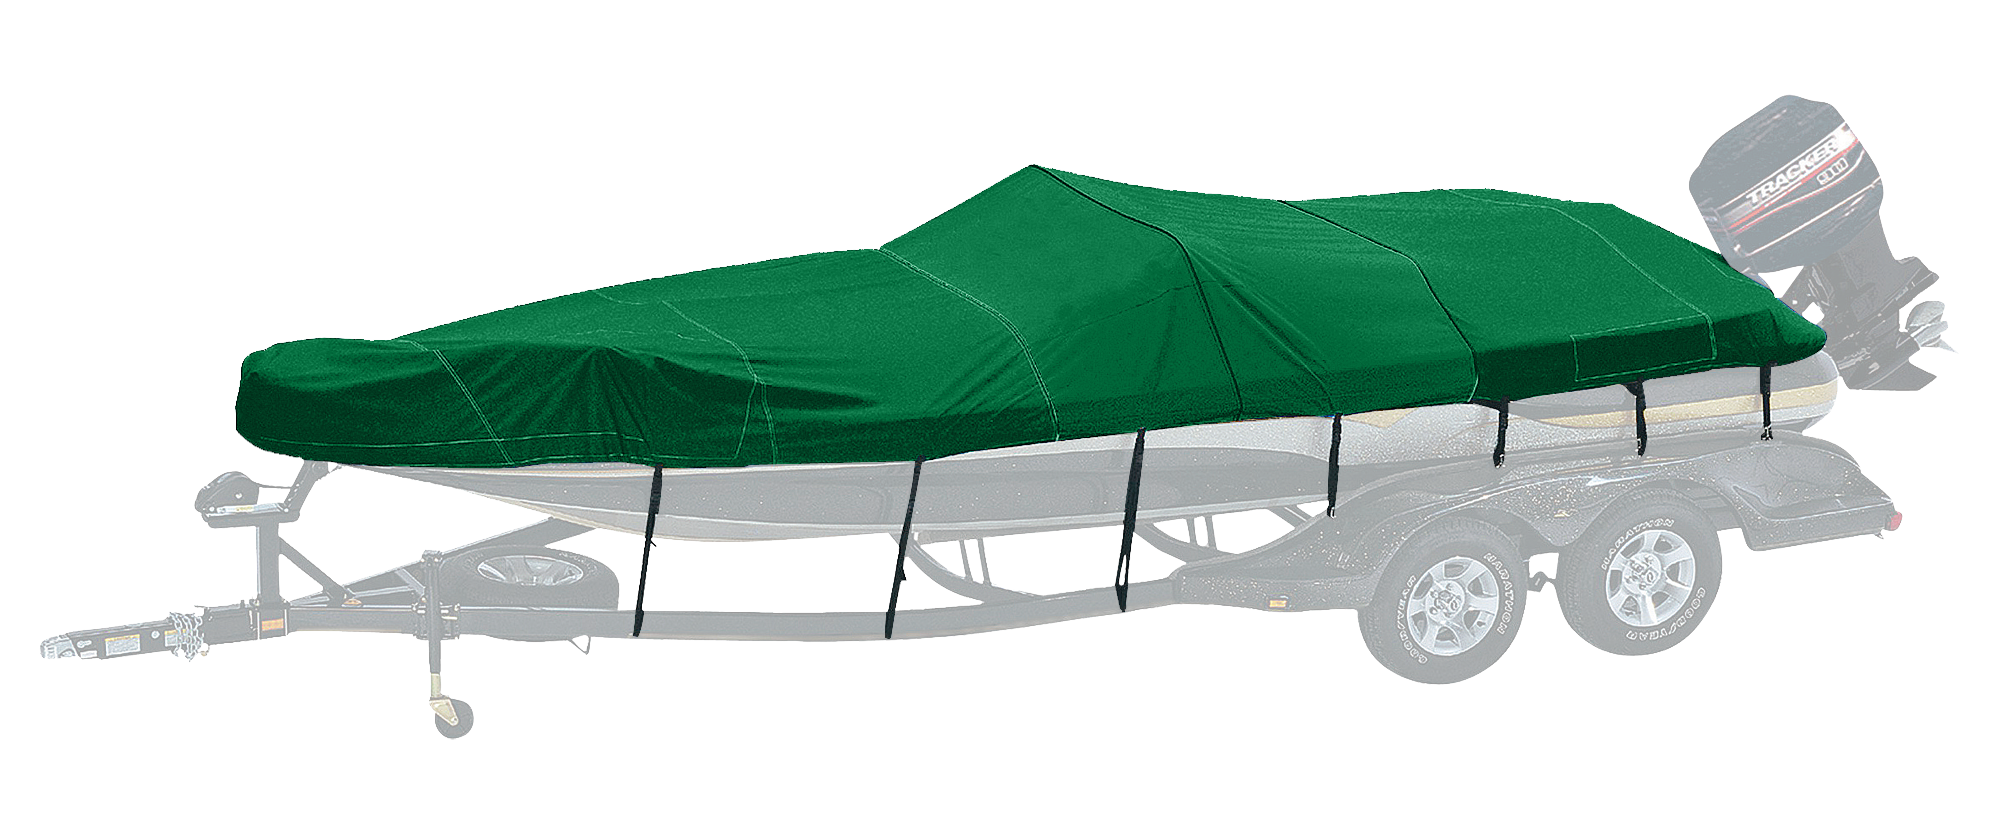 Bass Pro Shops Exact Fit Boat Cover by Westland - Tahoe - 2005 228 Deckboat I/O with Tower - Forest Green